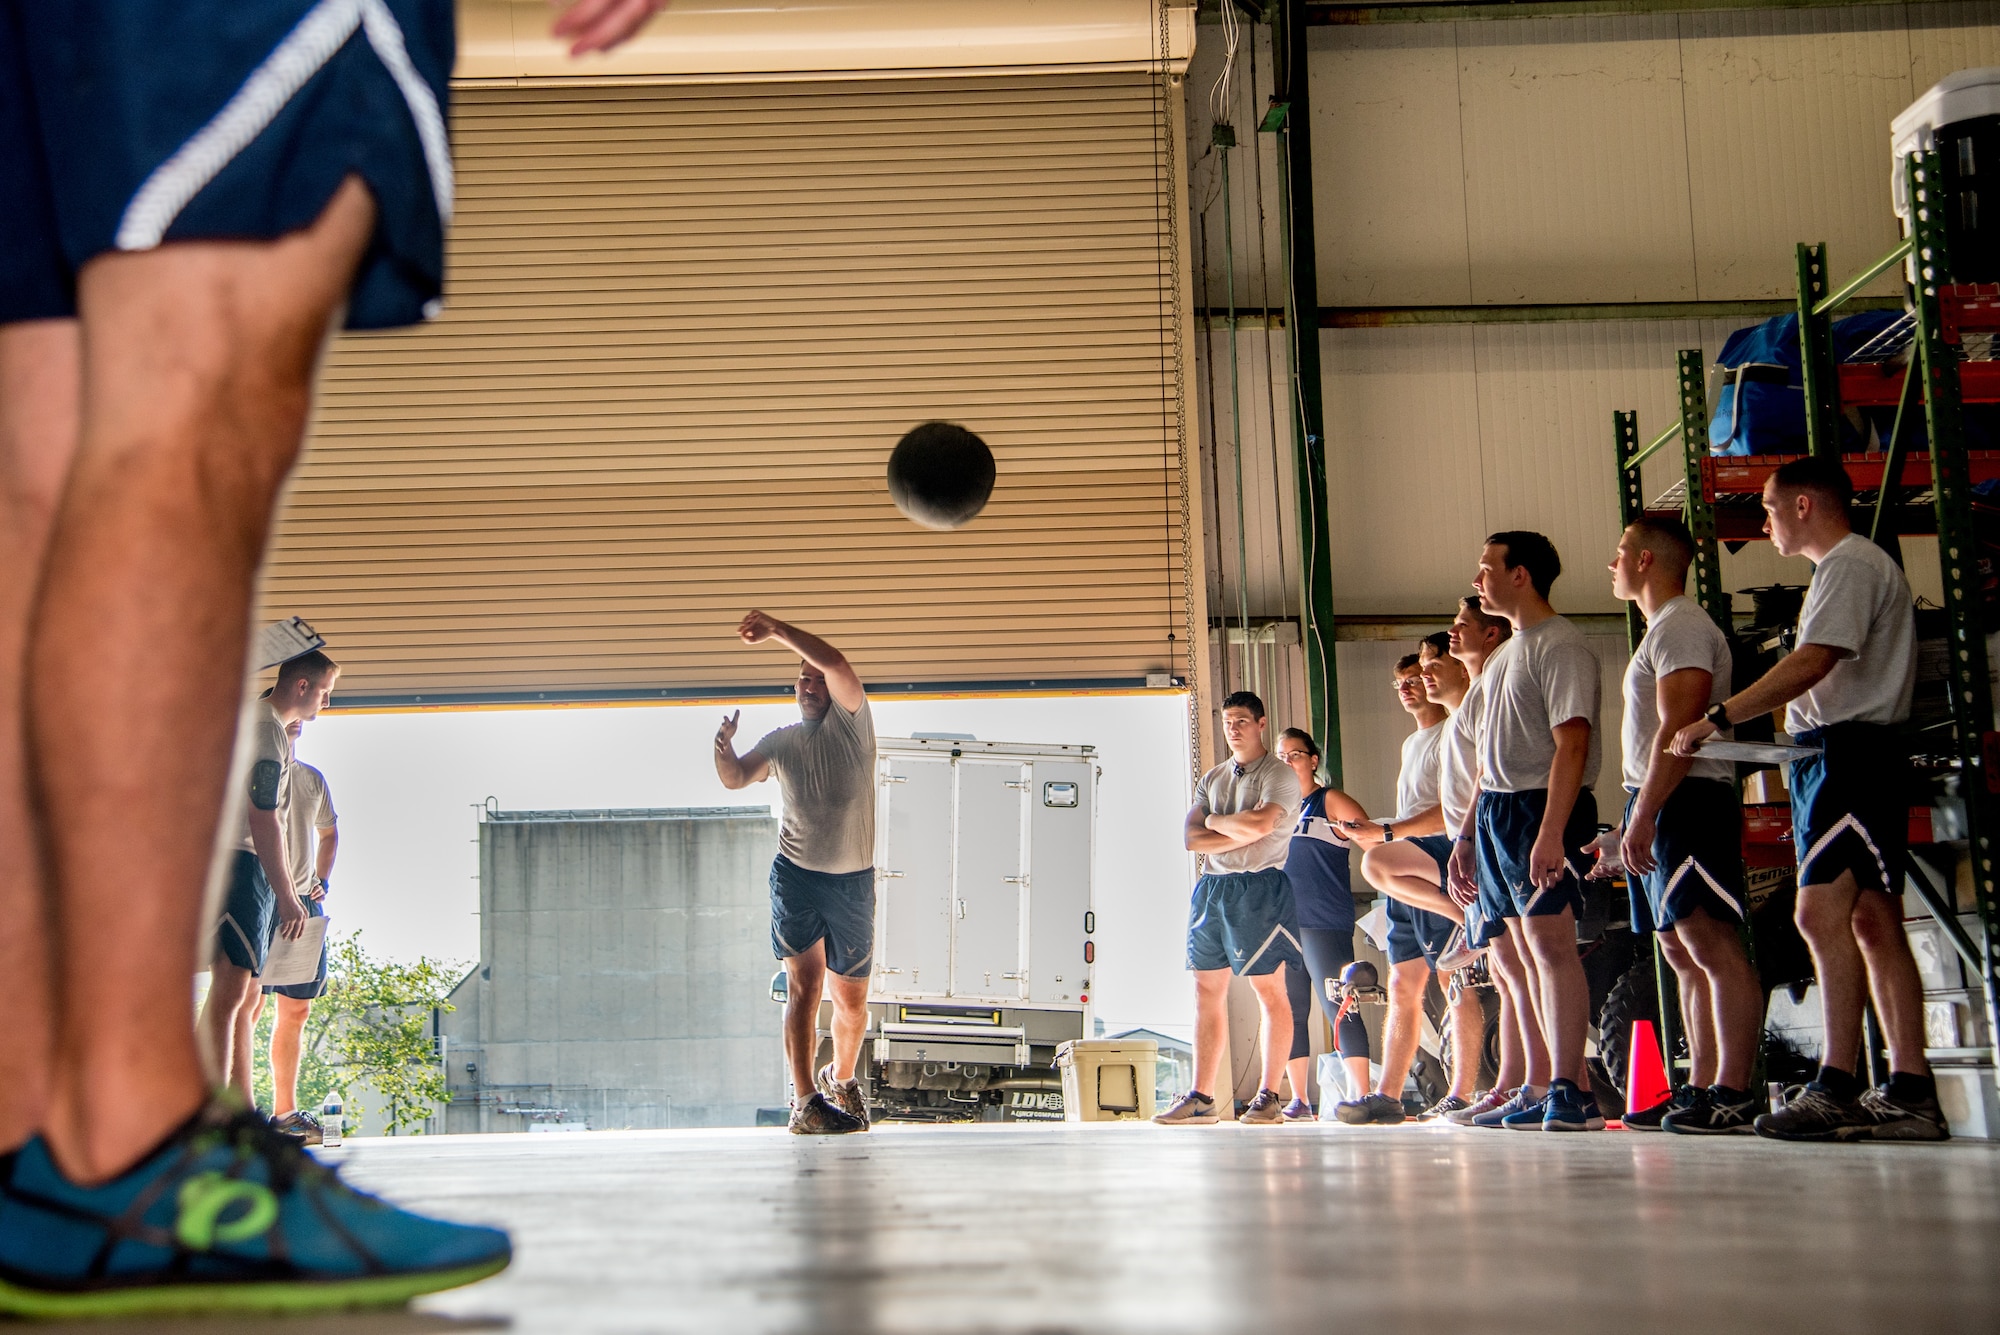 Explosive Ordnance Disposal Airmen perform the Medicine Ball Toss component of the EOD Tier 2 Physical Fitness Test Prototype at Dover Air Force Base, Del., Aug. 8, 2018. EOD Airmen assigned to units in nine states participated in the EOD prototype test. (U.S. Air Force photo by Staff Sgt. Damien Taylor)